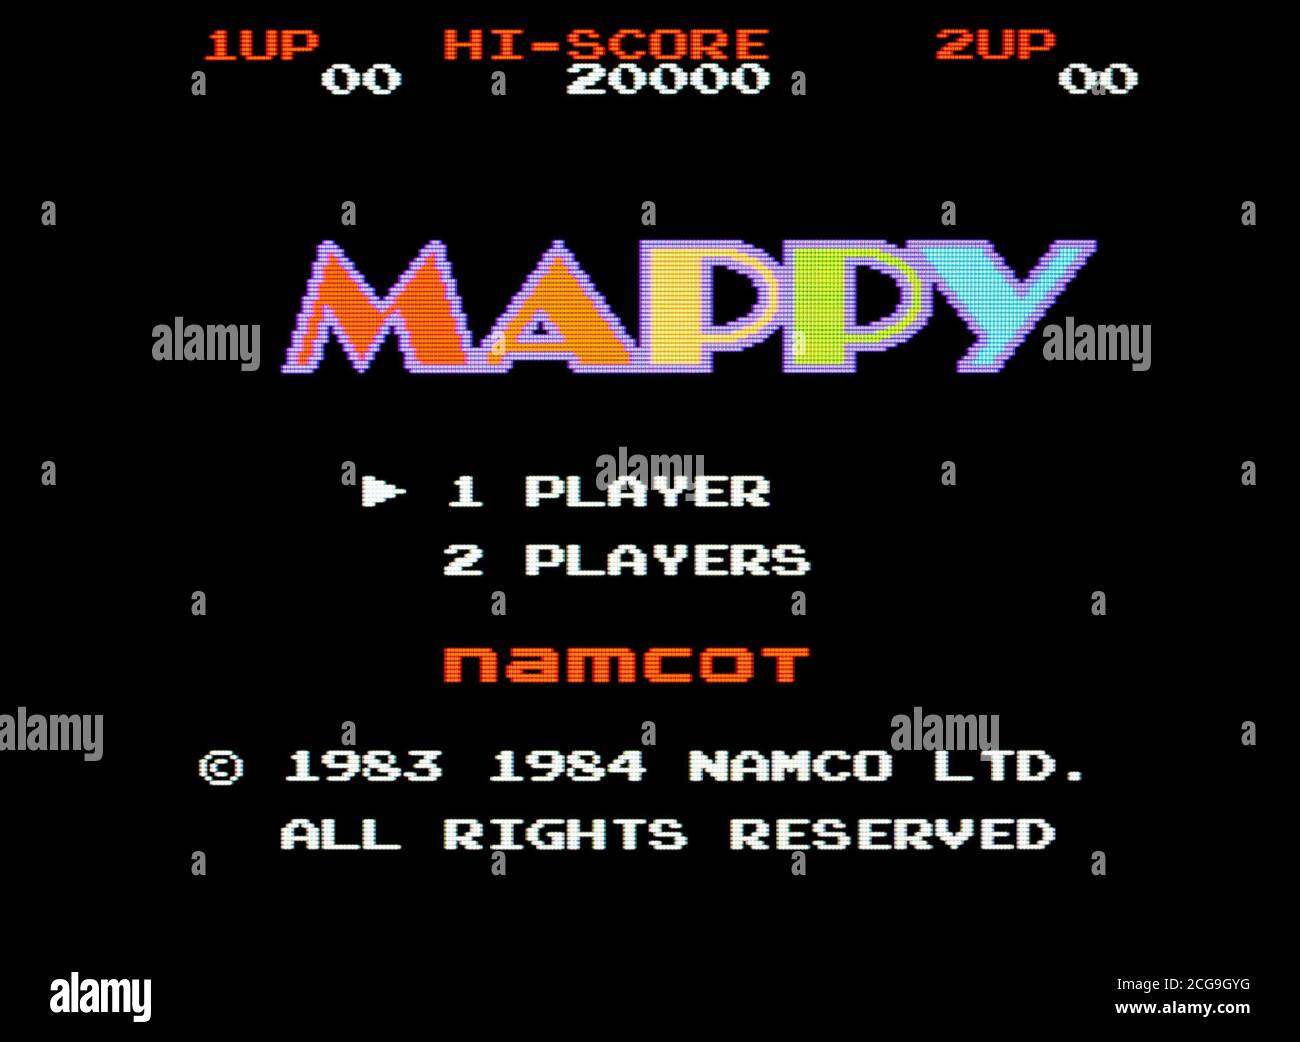 Mappy - Nintendo Entertainment System - NES Videogame - Editorial use only  Stock Photo - Alamy